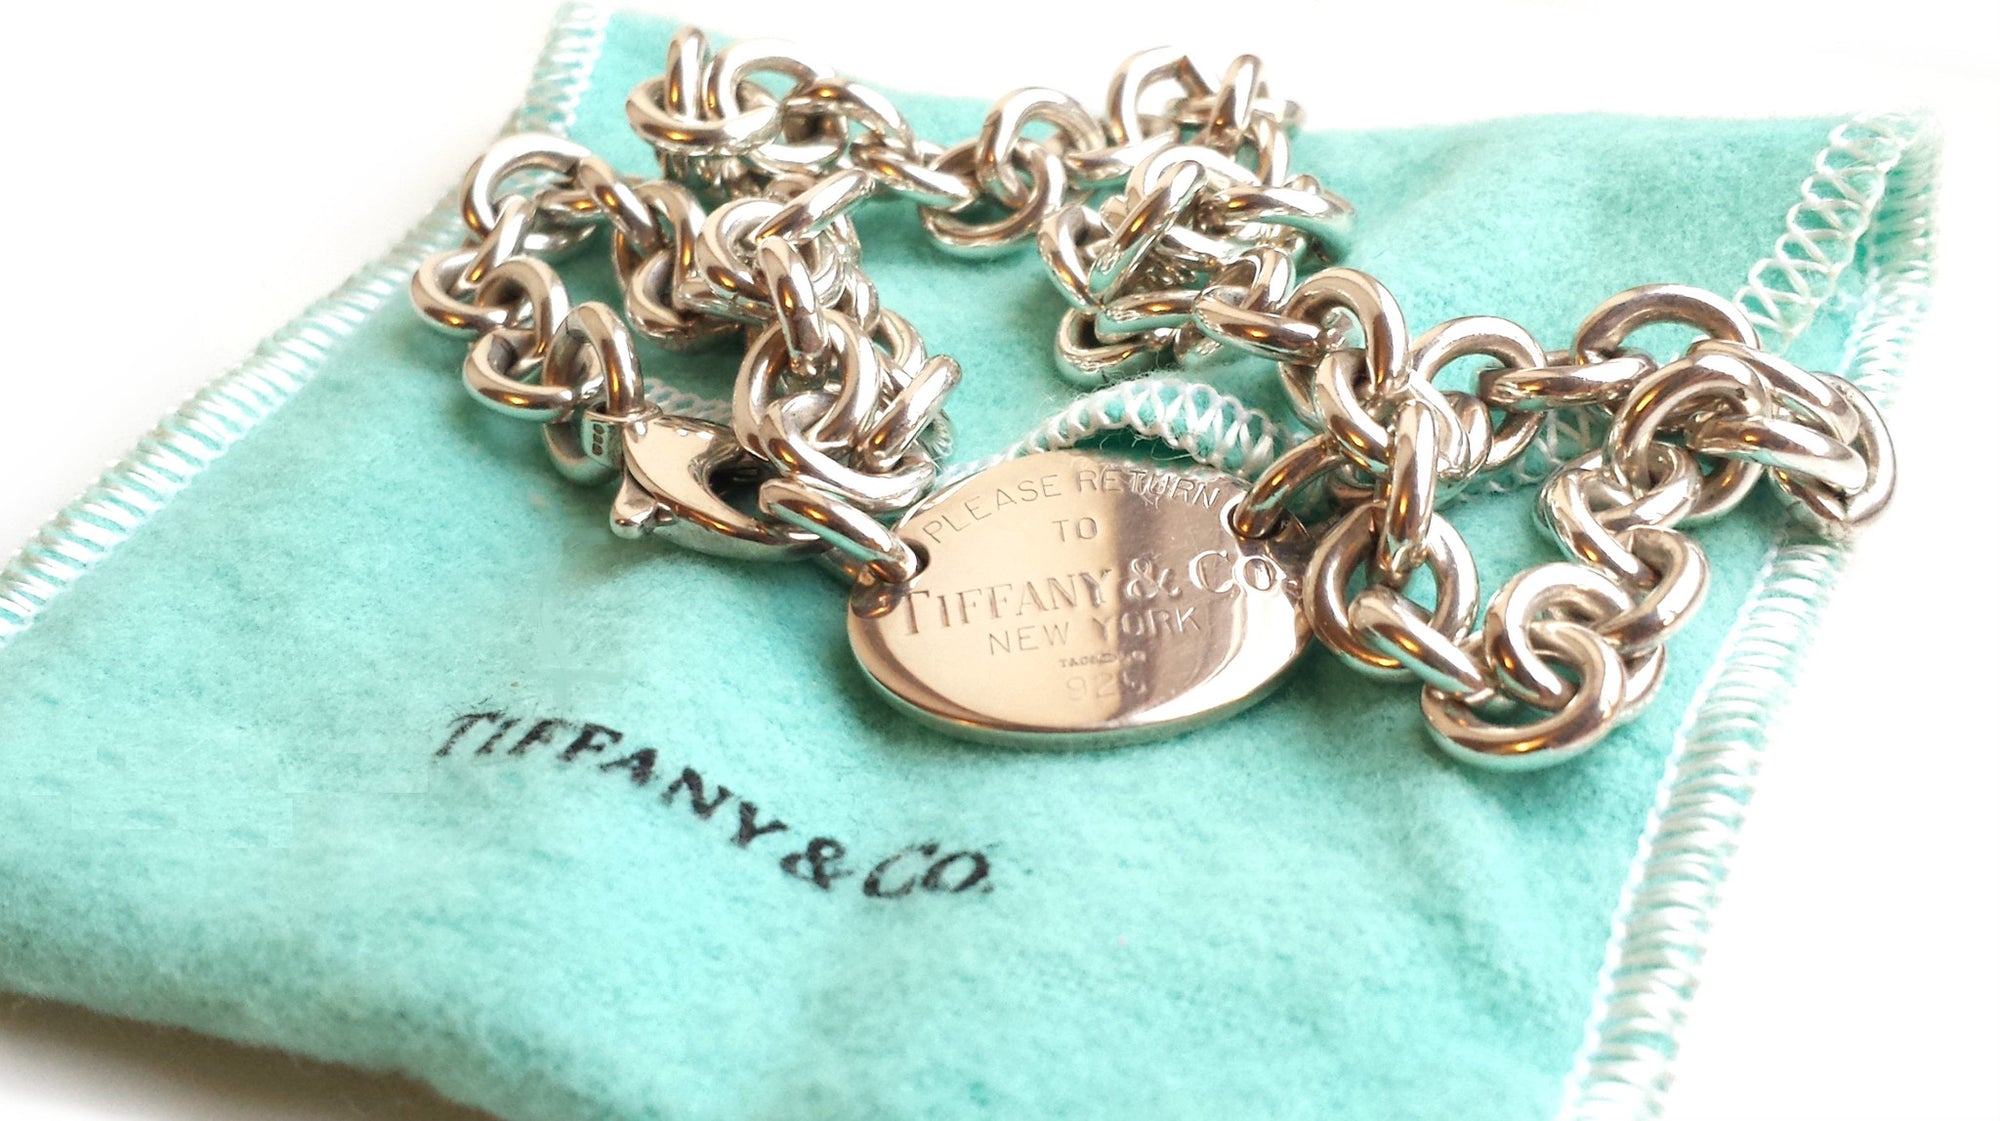 Tiffany & Co Sterling Silver Please Return To Choker/Necklace 15in